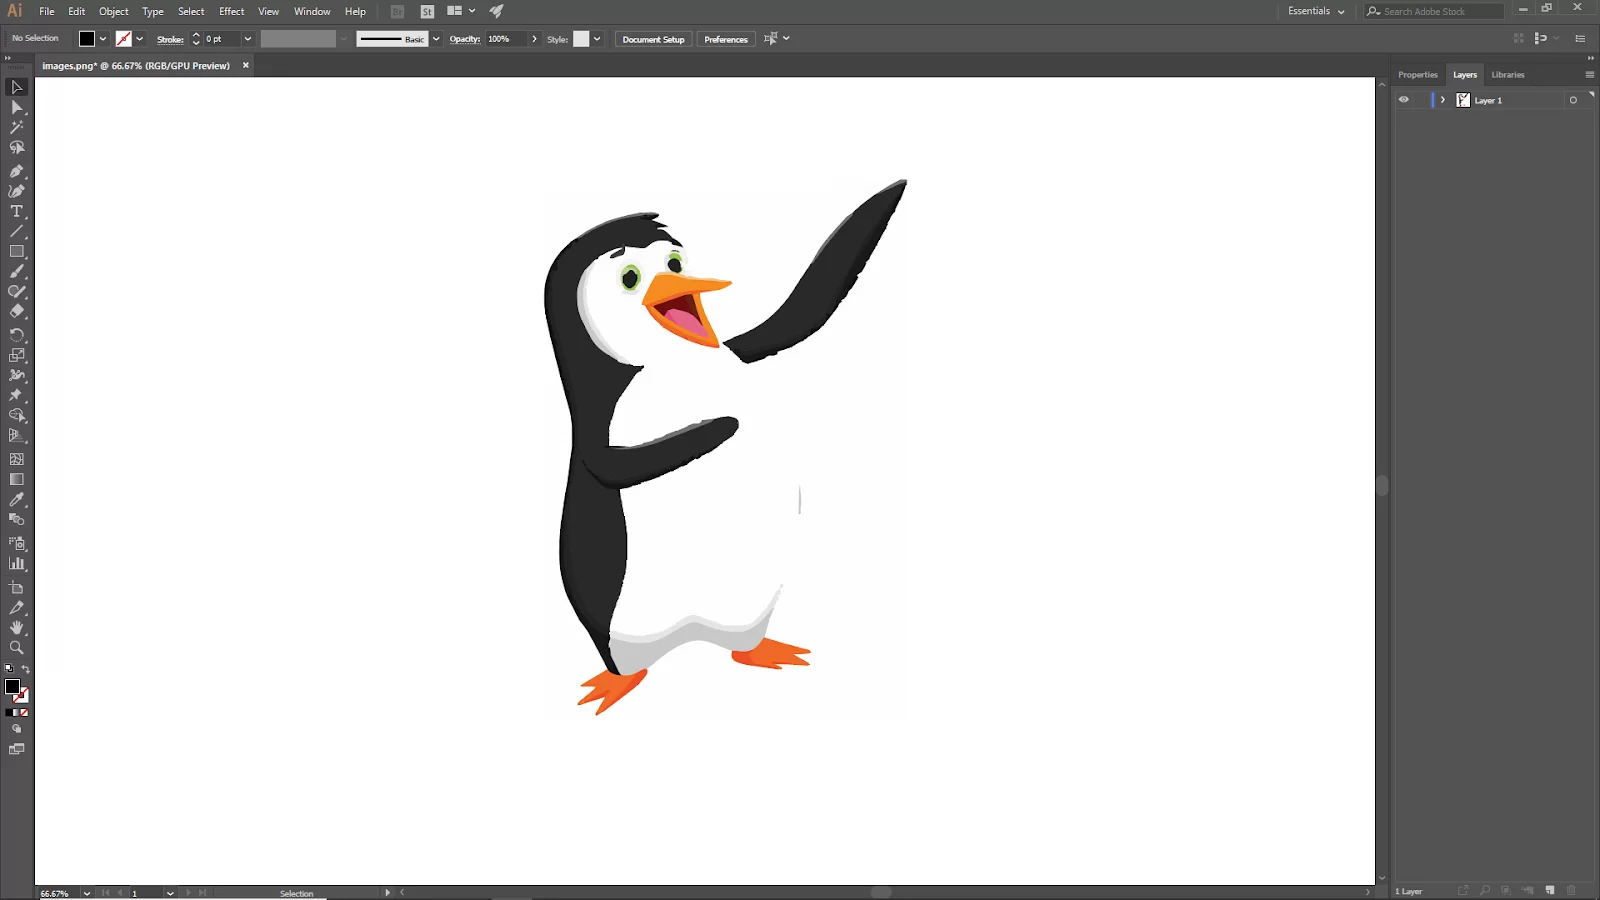 Expand Image in Illustrator